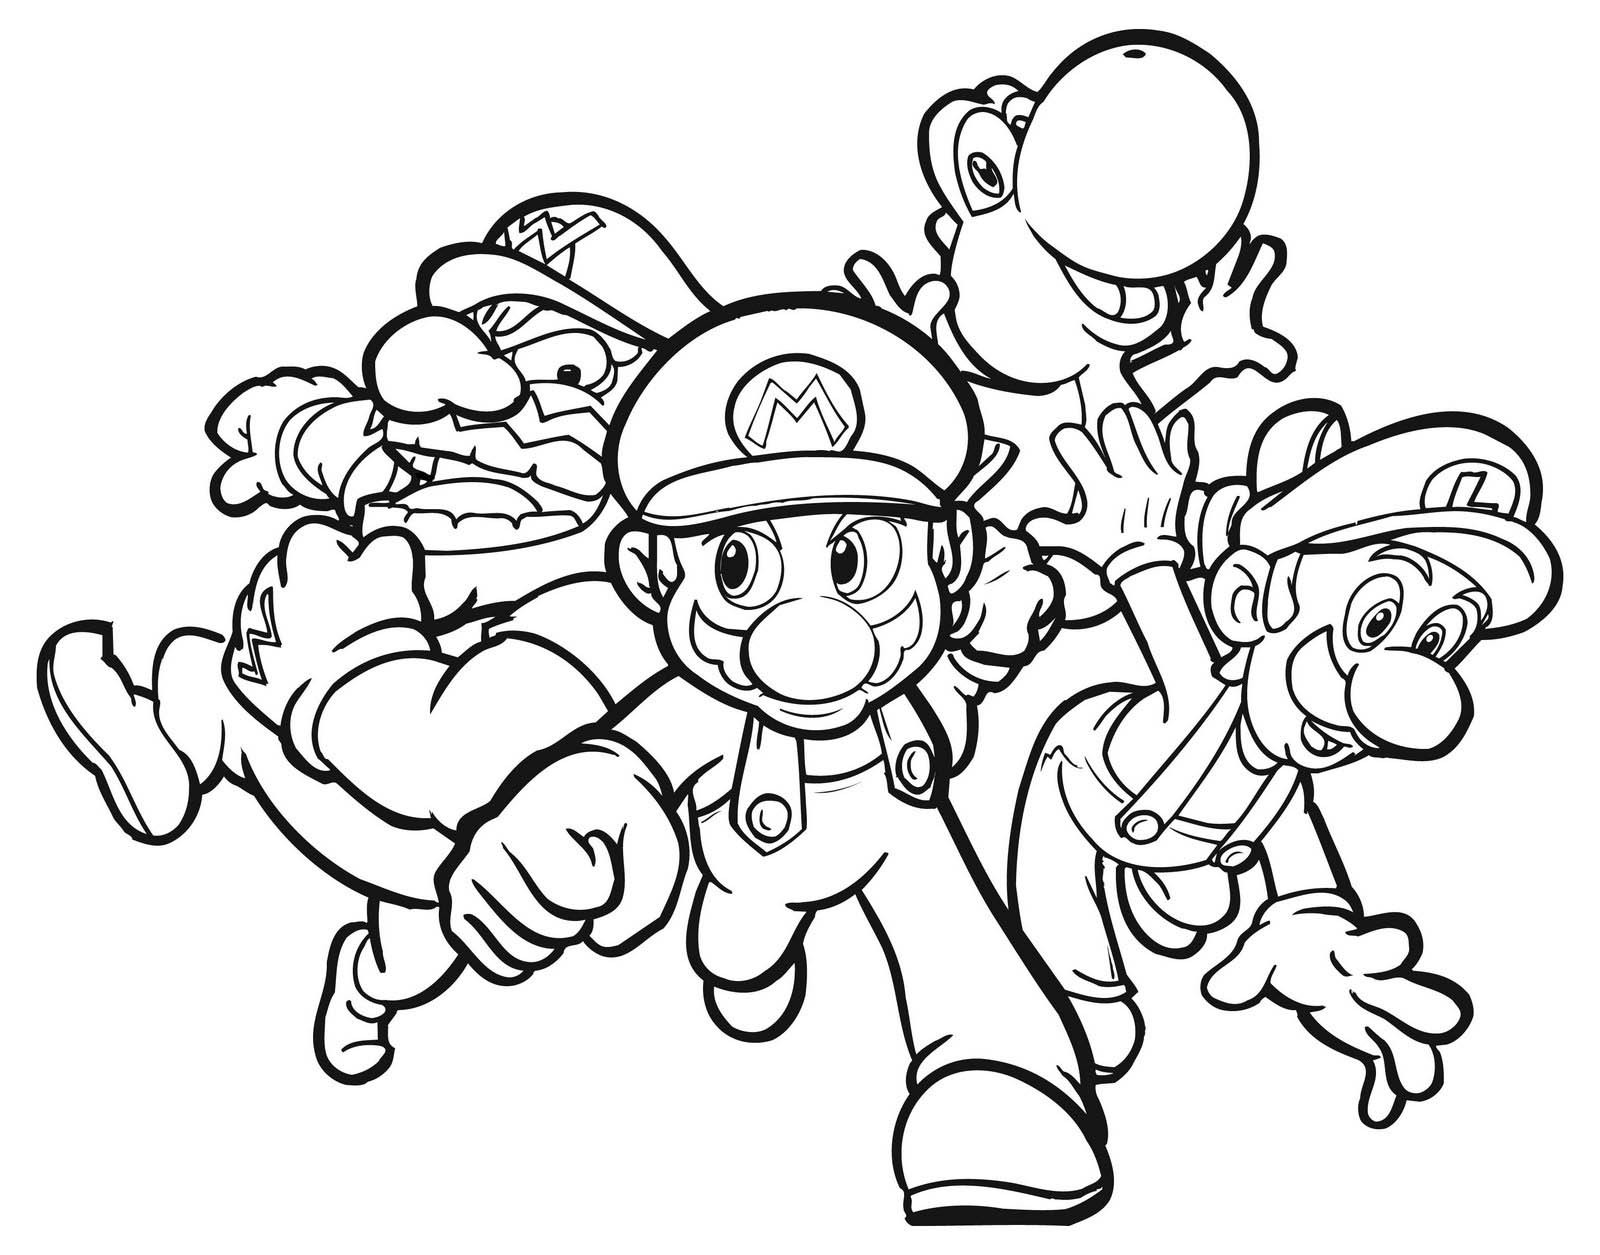 Mario Coloring Book
 Free Printable Mario Coloring Pages For Kids